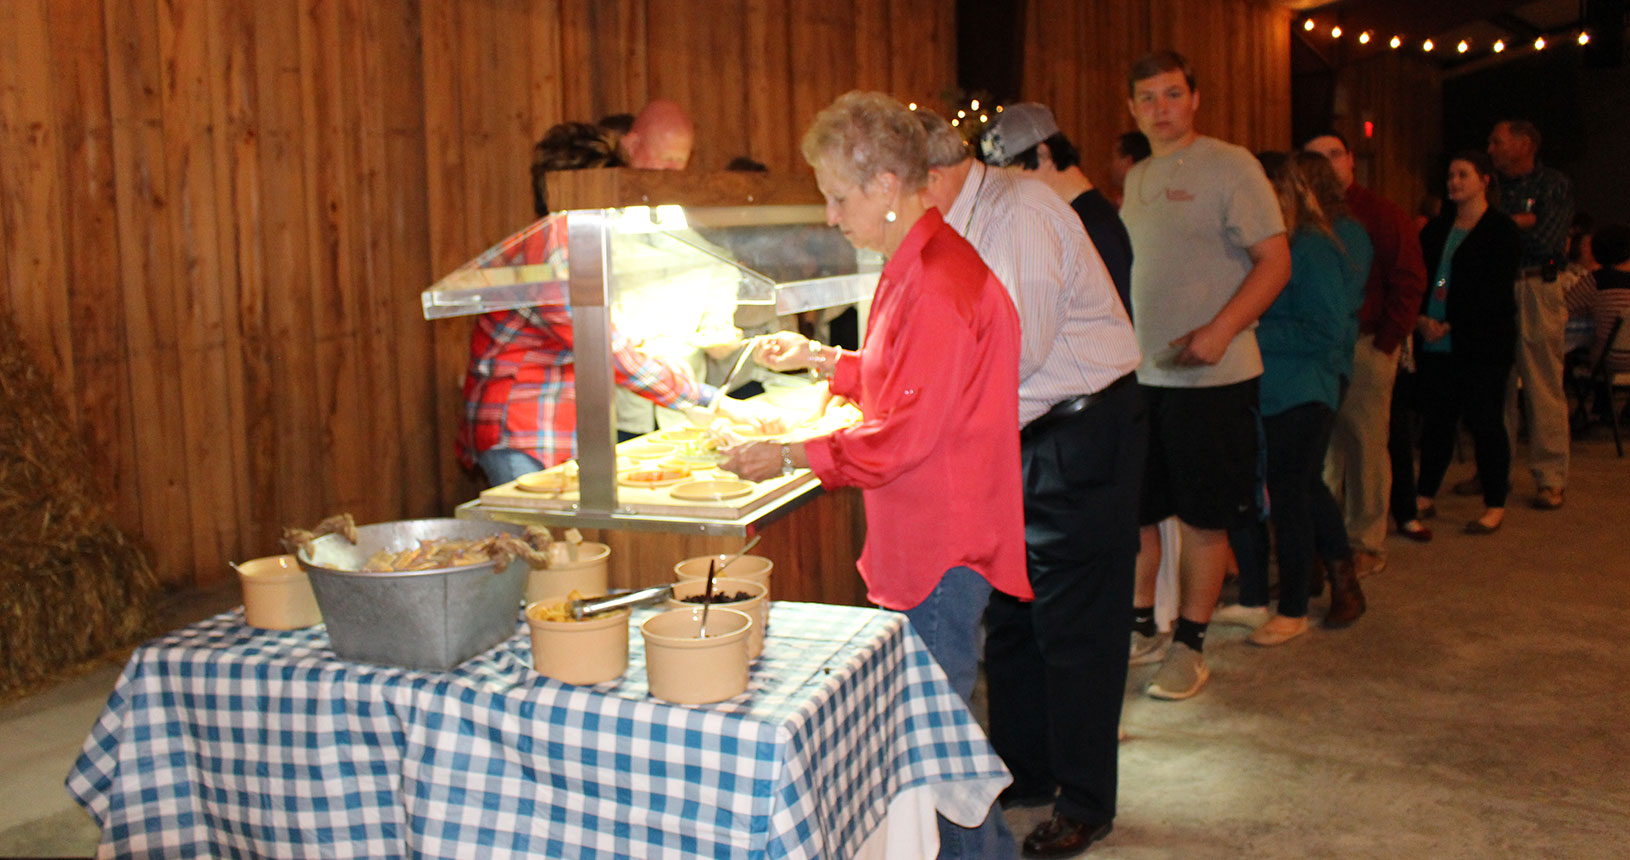 A woman in red shirt standing next to food.